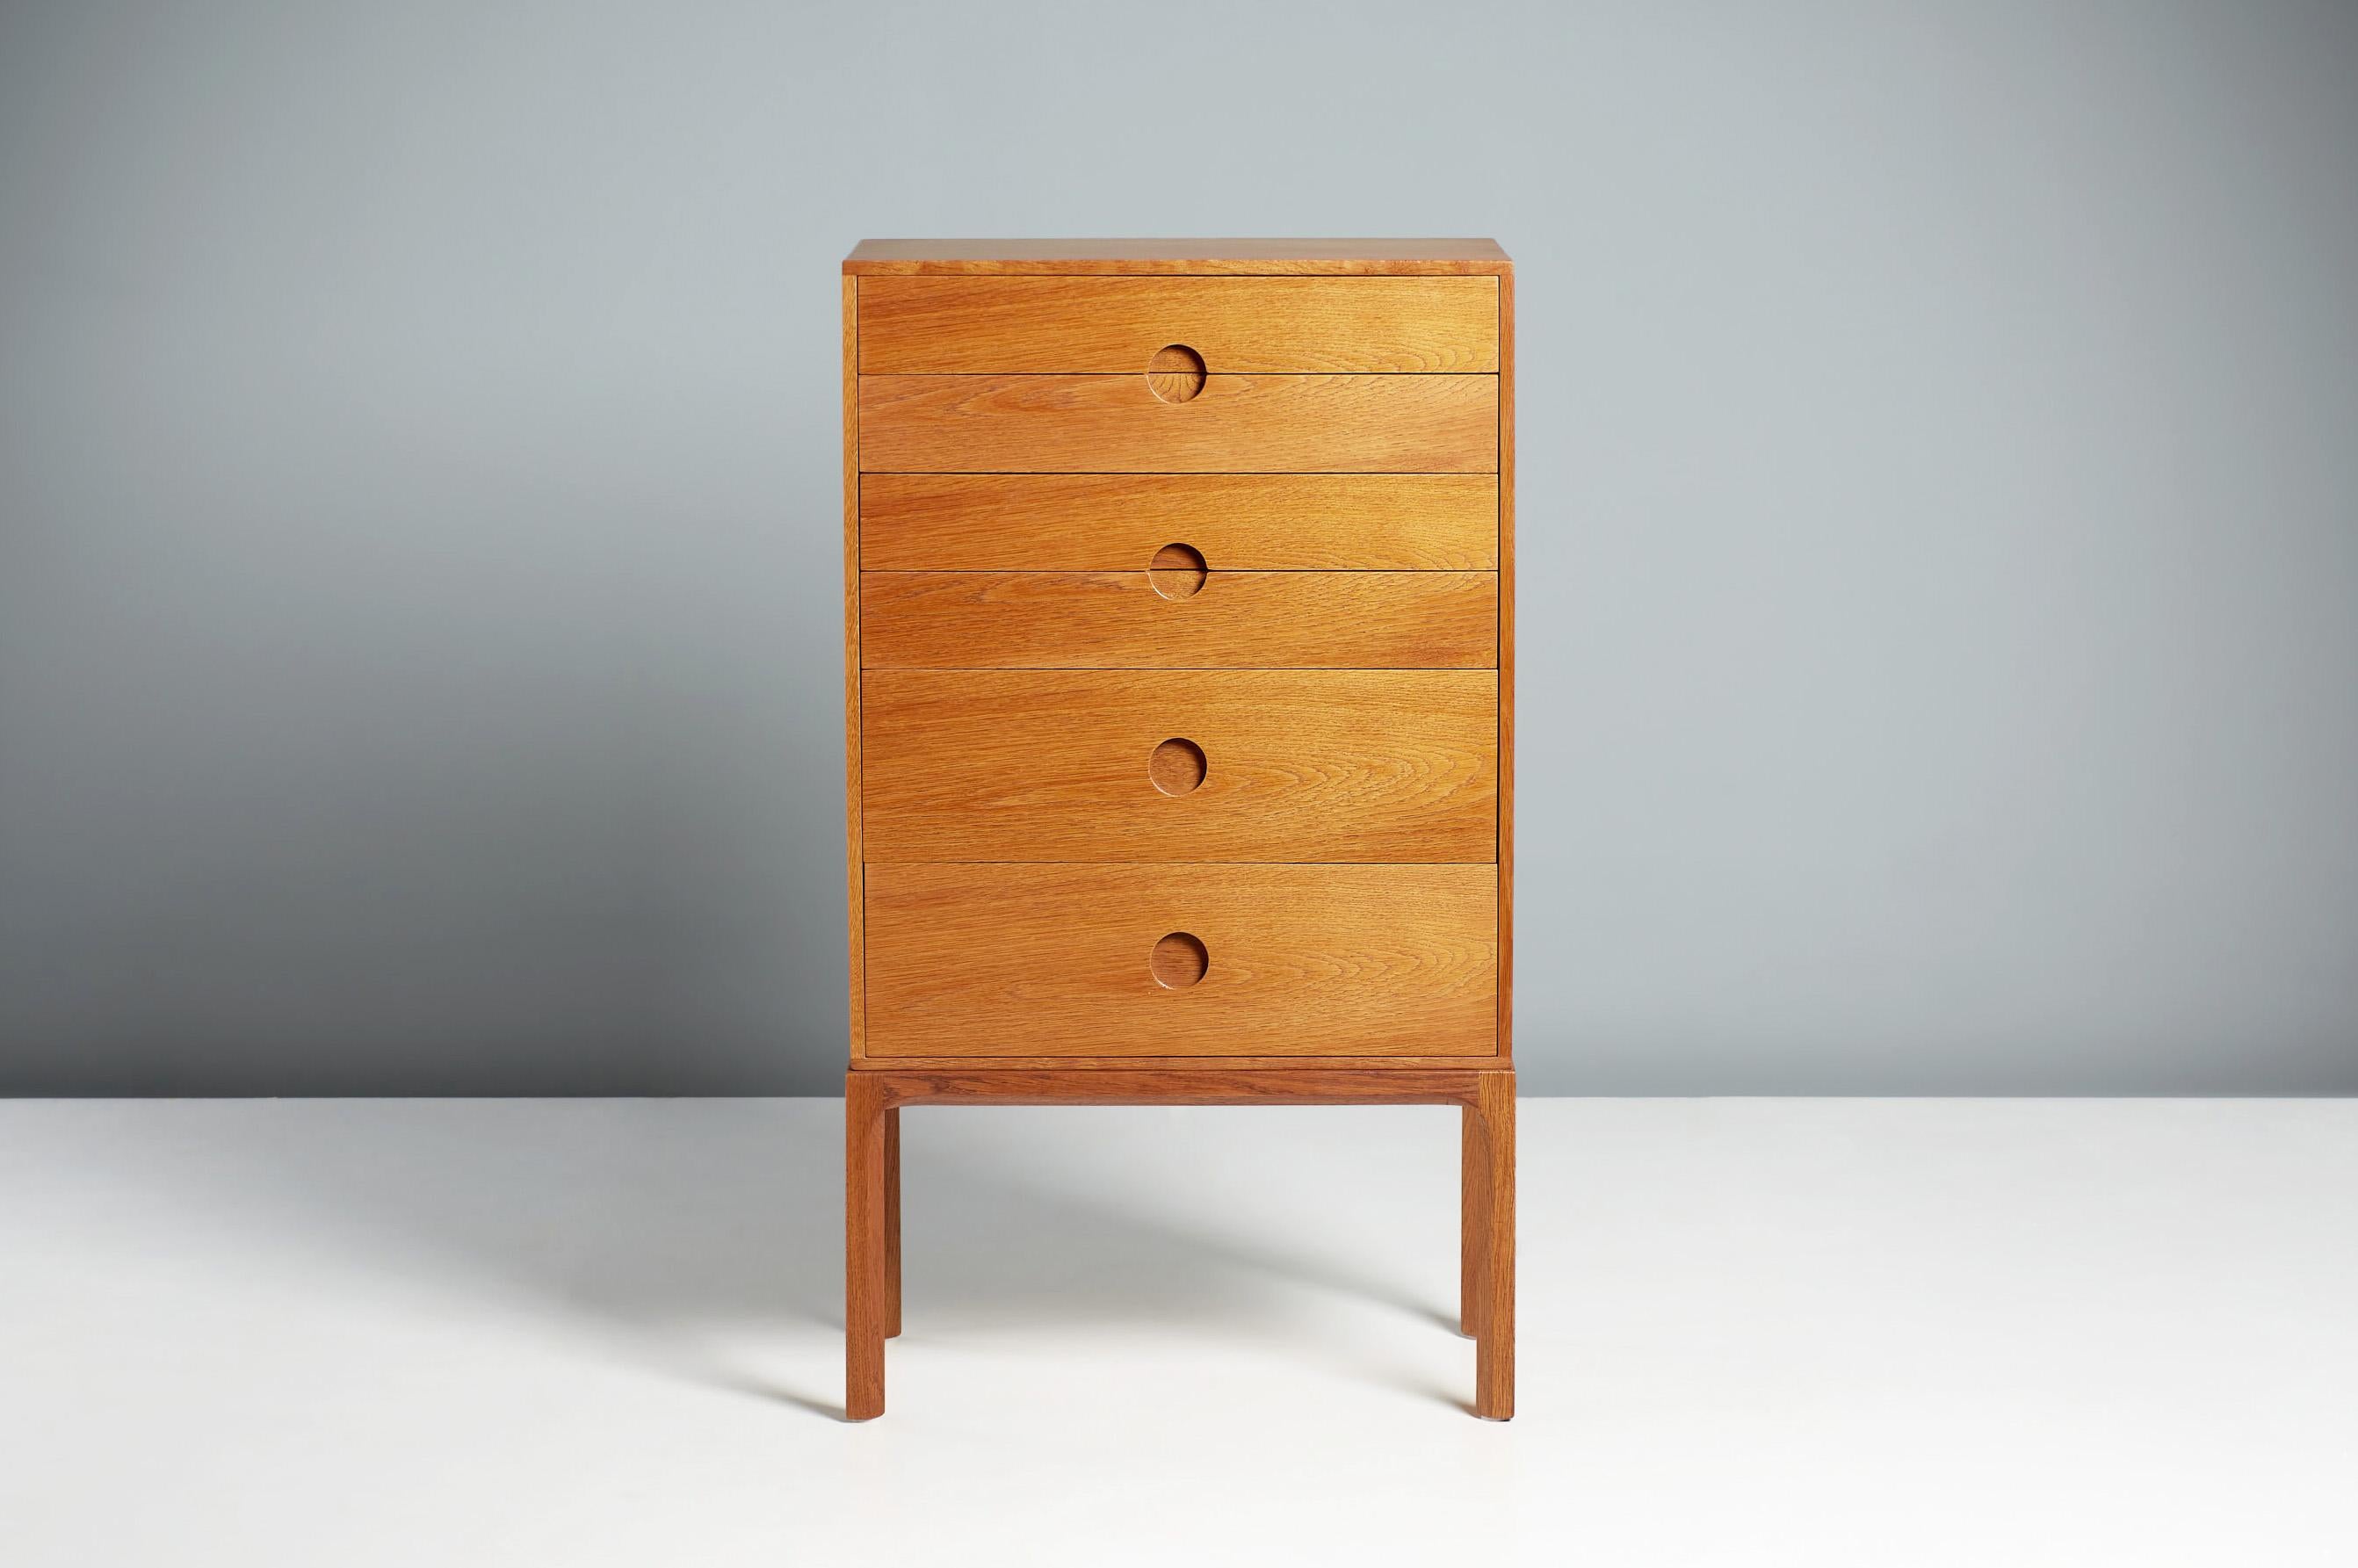 Kai Kristiansen Model 385 Chest of Drawers, circa 1960.

Oak tallboy chest, produced by Aksel Kjersgaard in Odder, Denmark. Solid oak frame with veneered cabinet and half-moon drawer pulls. Refinished in Danish oil. Rarely seen model from this